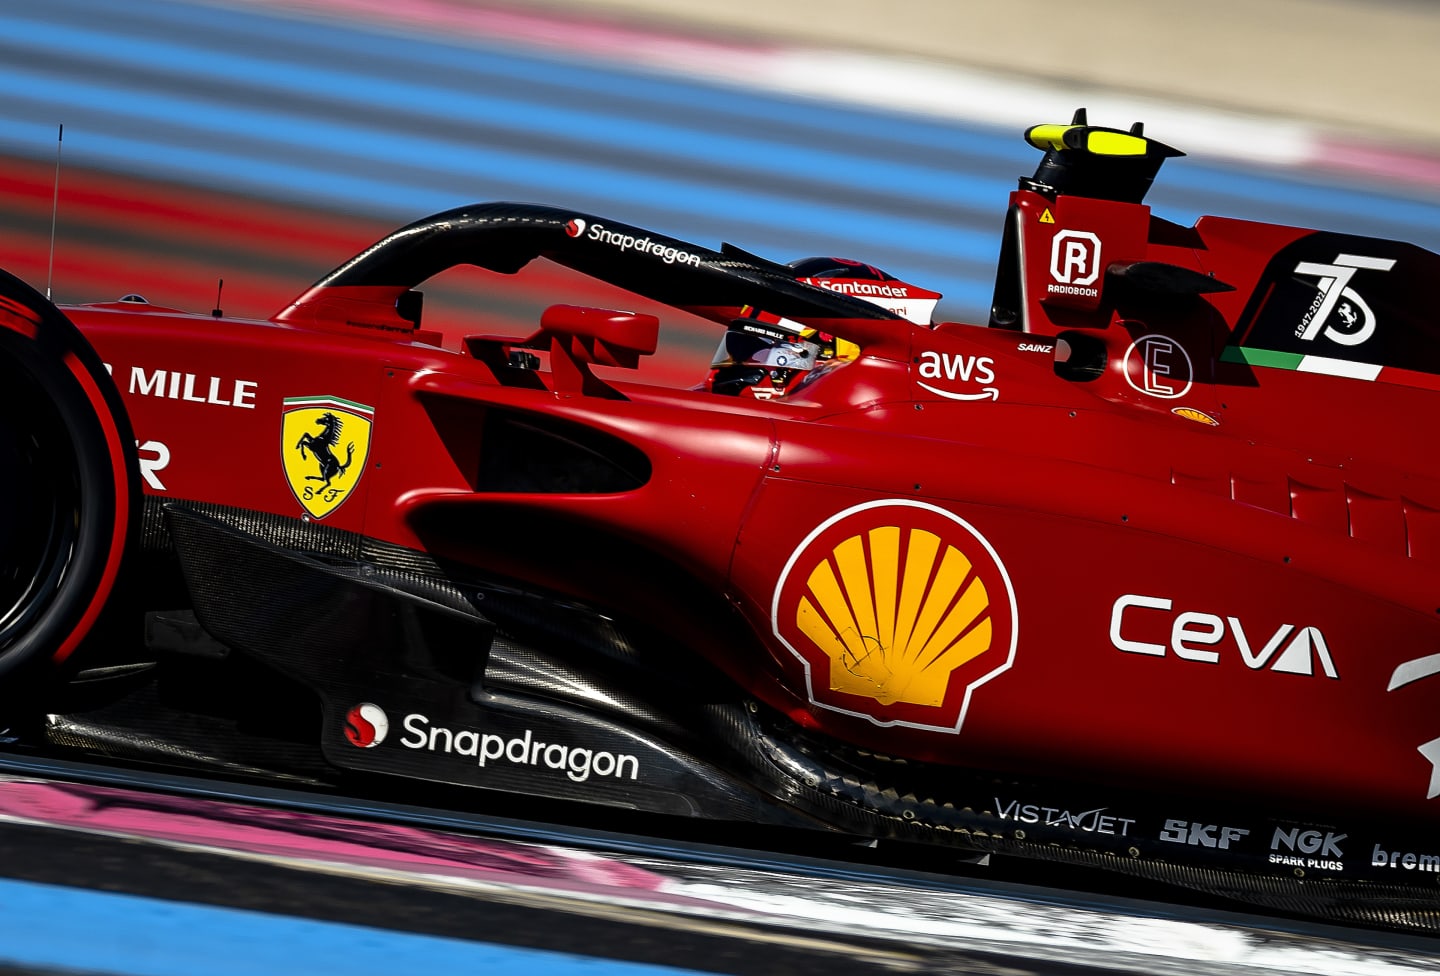 LE CASTELLET - Carlos Sainz (Ferrari) during qualifying ahead of the F1 Grand Prix of France at